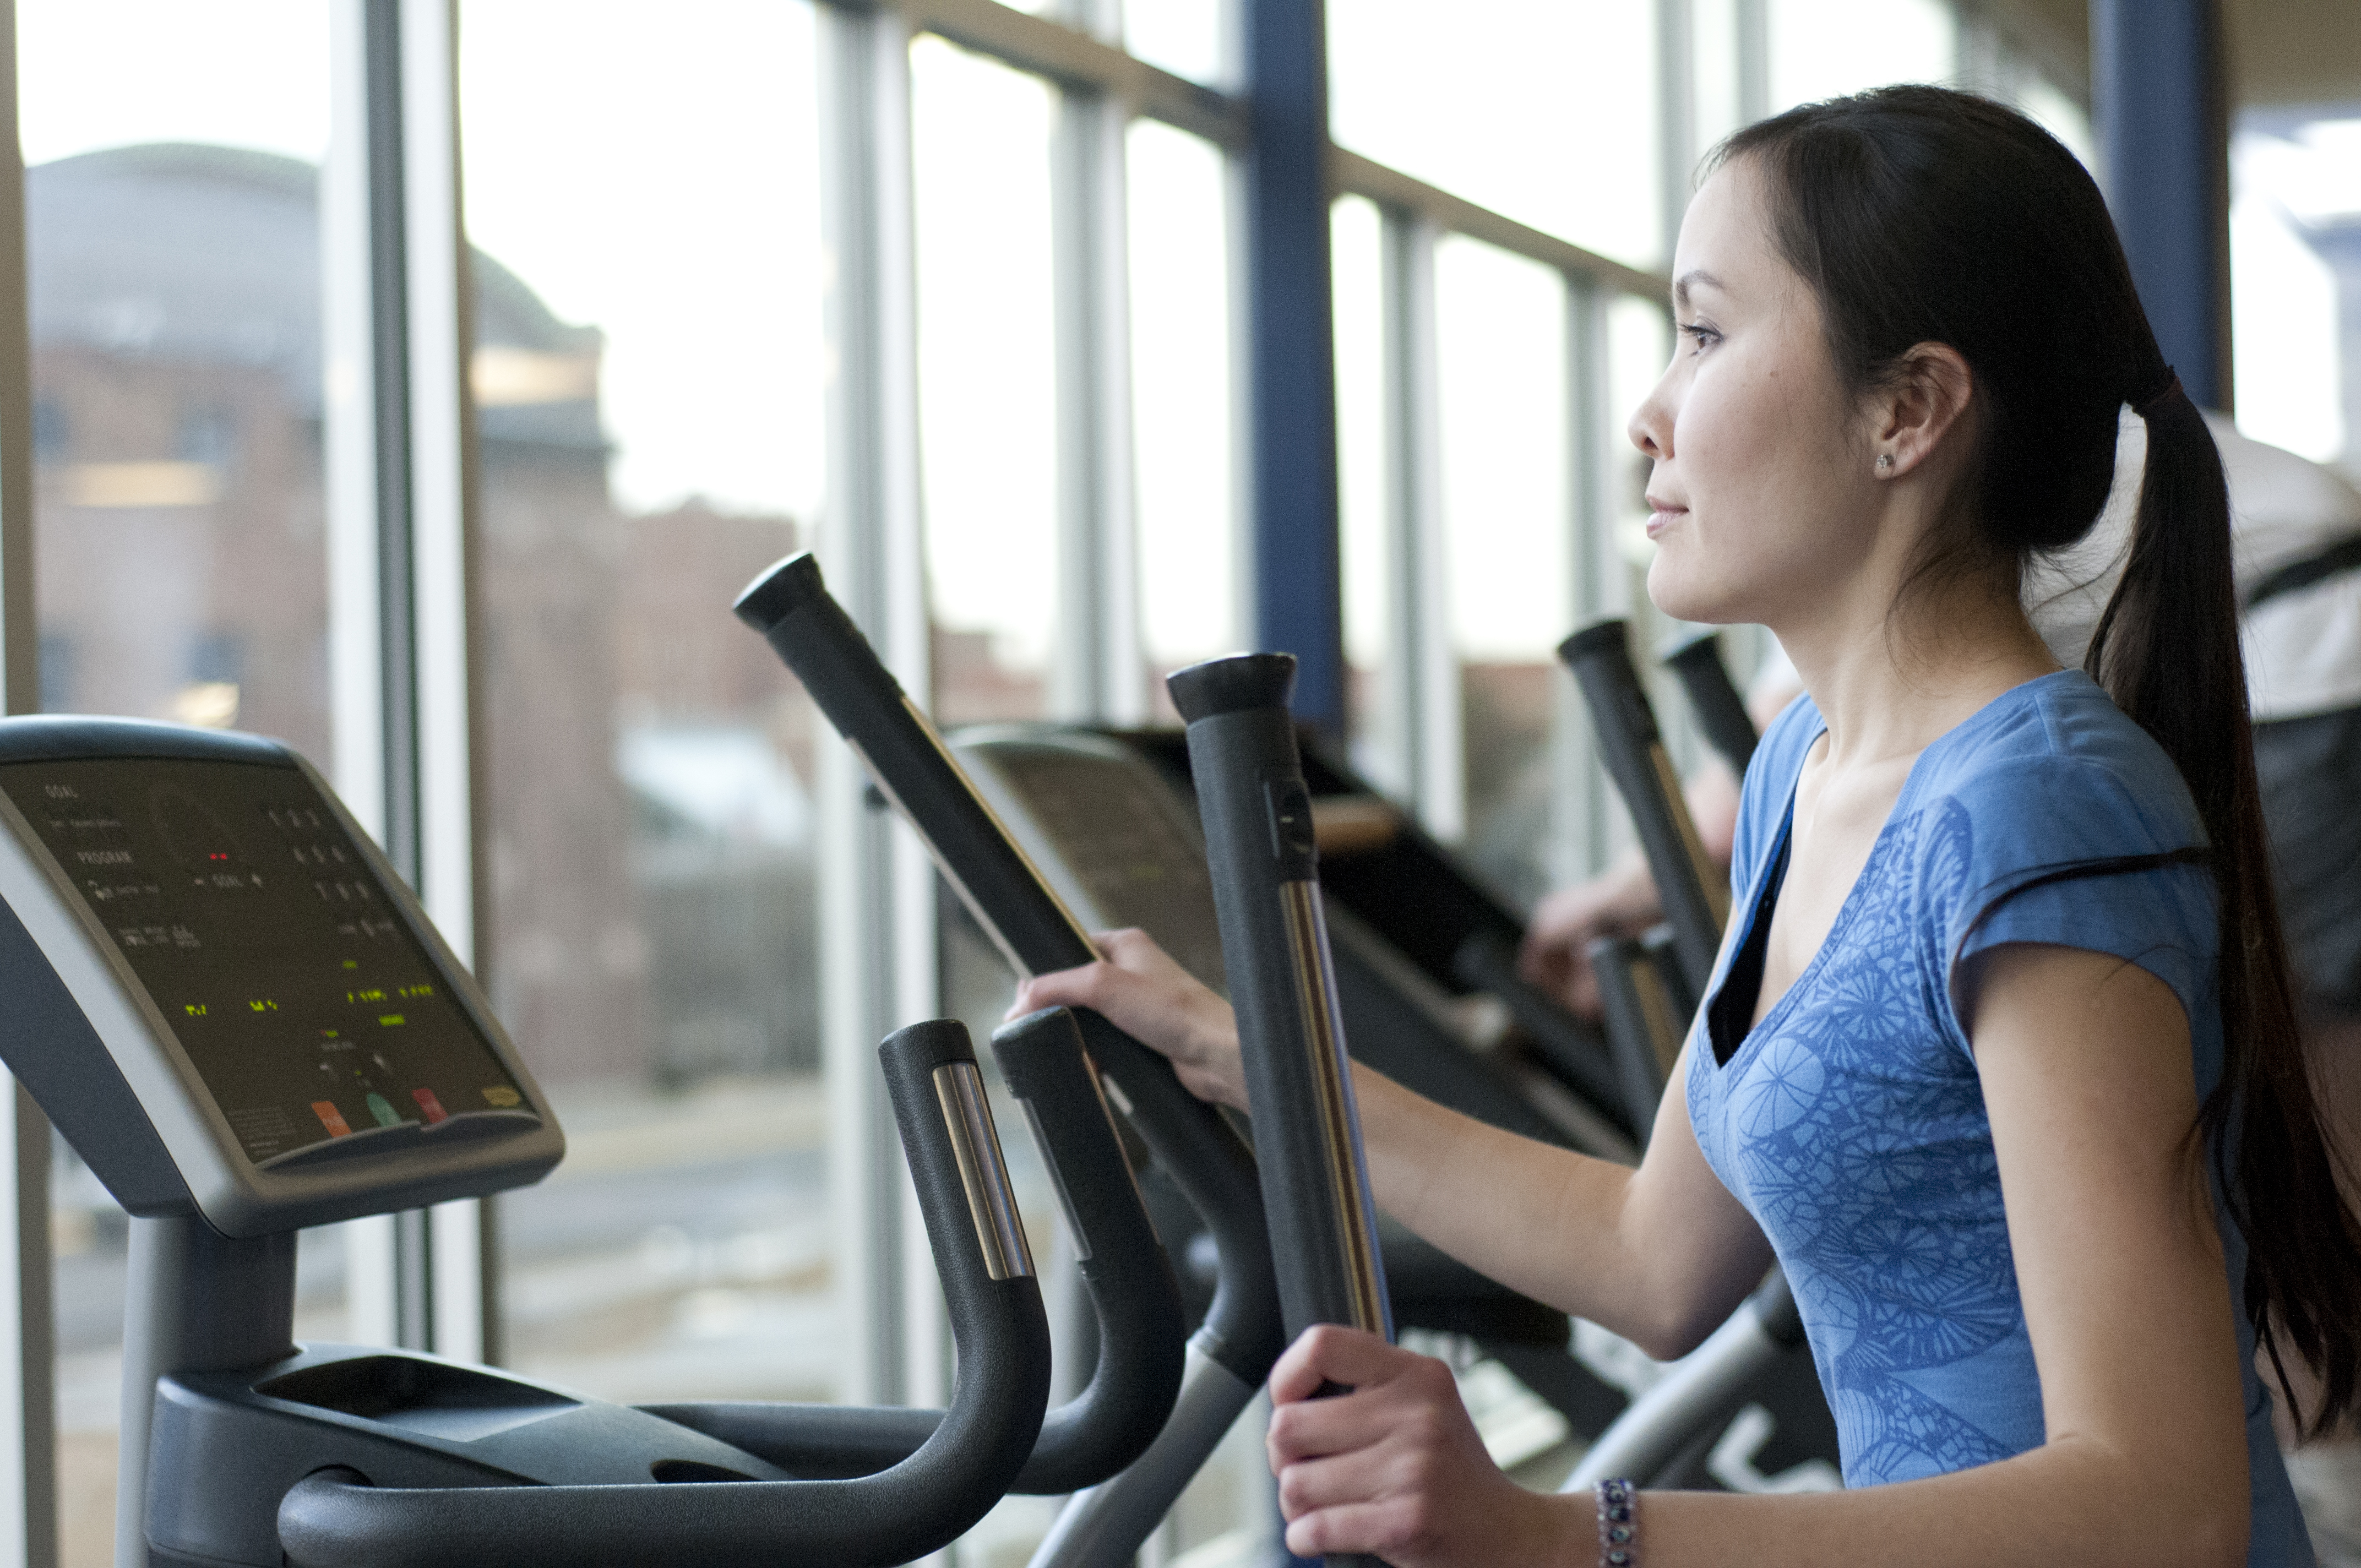 A picture of a woman using the Fitness Center